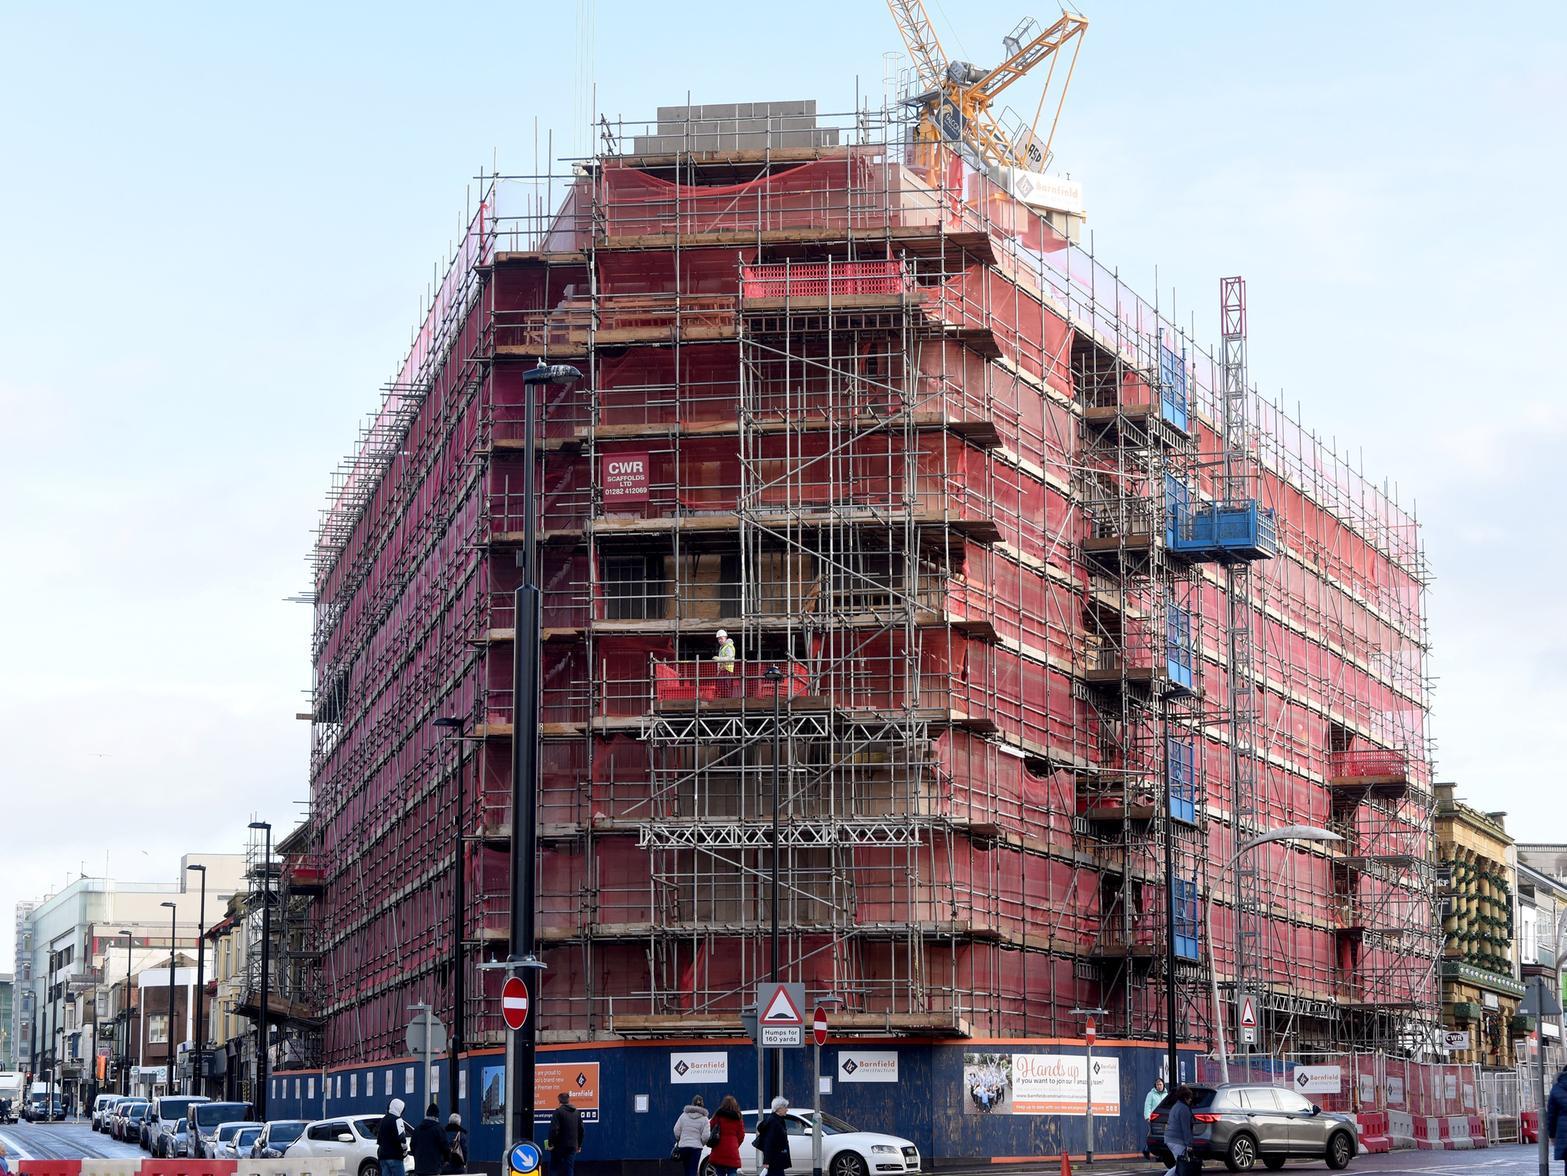 Recruitment will begin in February for staff to work at the 150-bedroom Premier Inn in Talbot Square, which will open on April 27. Facilities will include a ground floor Cookhouse restaurant which will be open to the public.